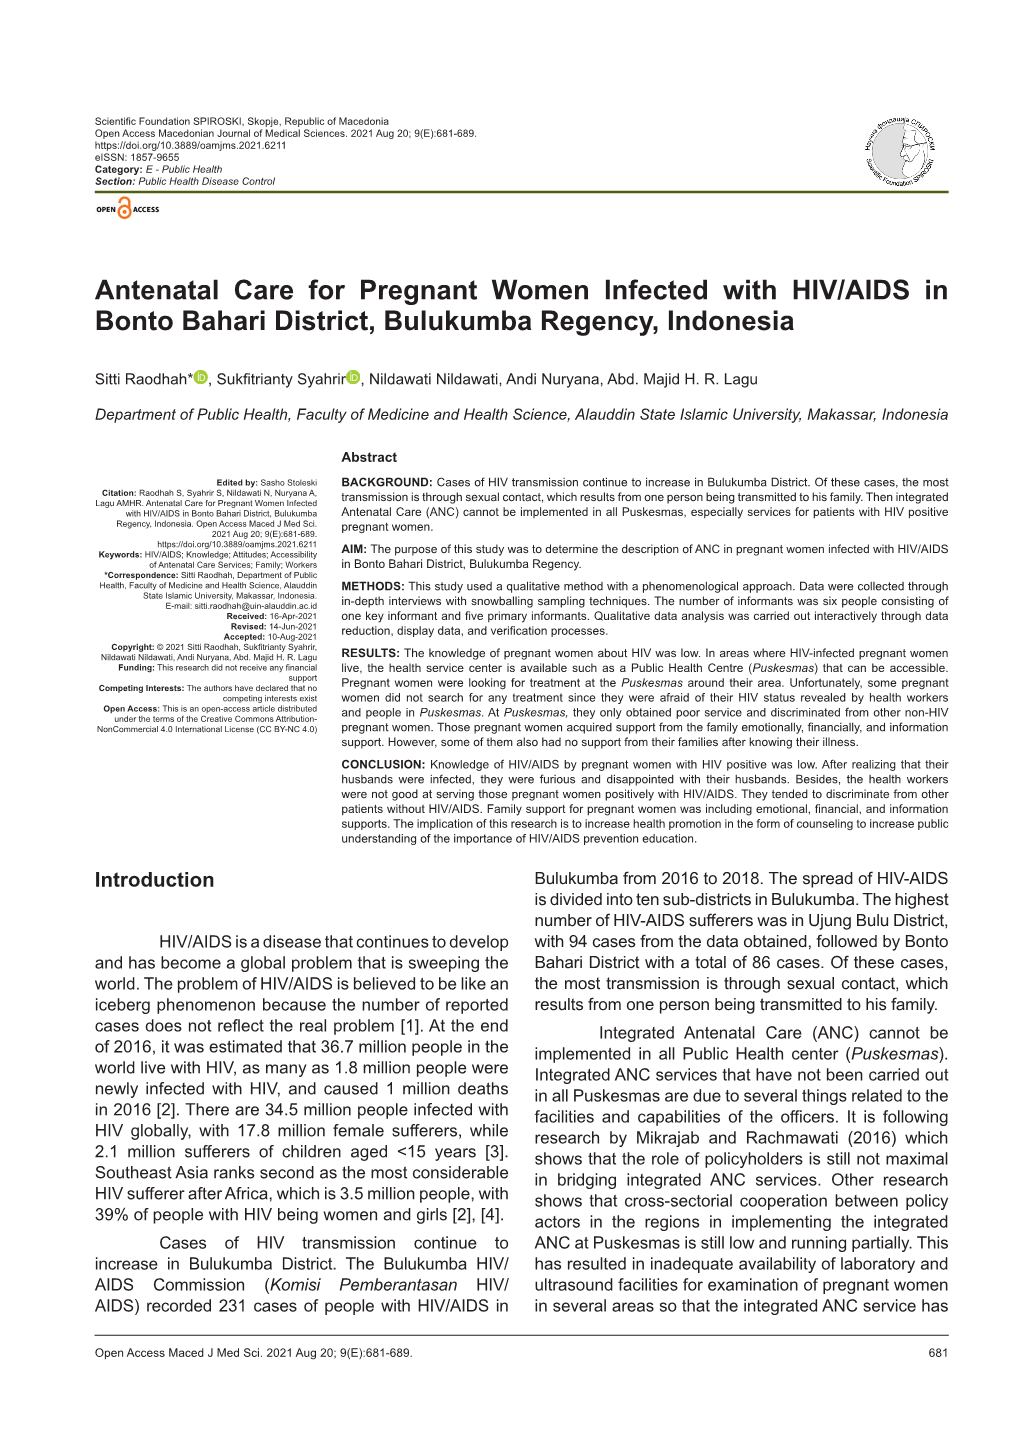 Antenatal Care for Pregnant Women Infected with HIV/AIDS in Bonto Bahari District, Bulukumba Regency, Indonesia